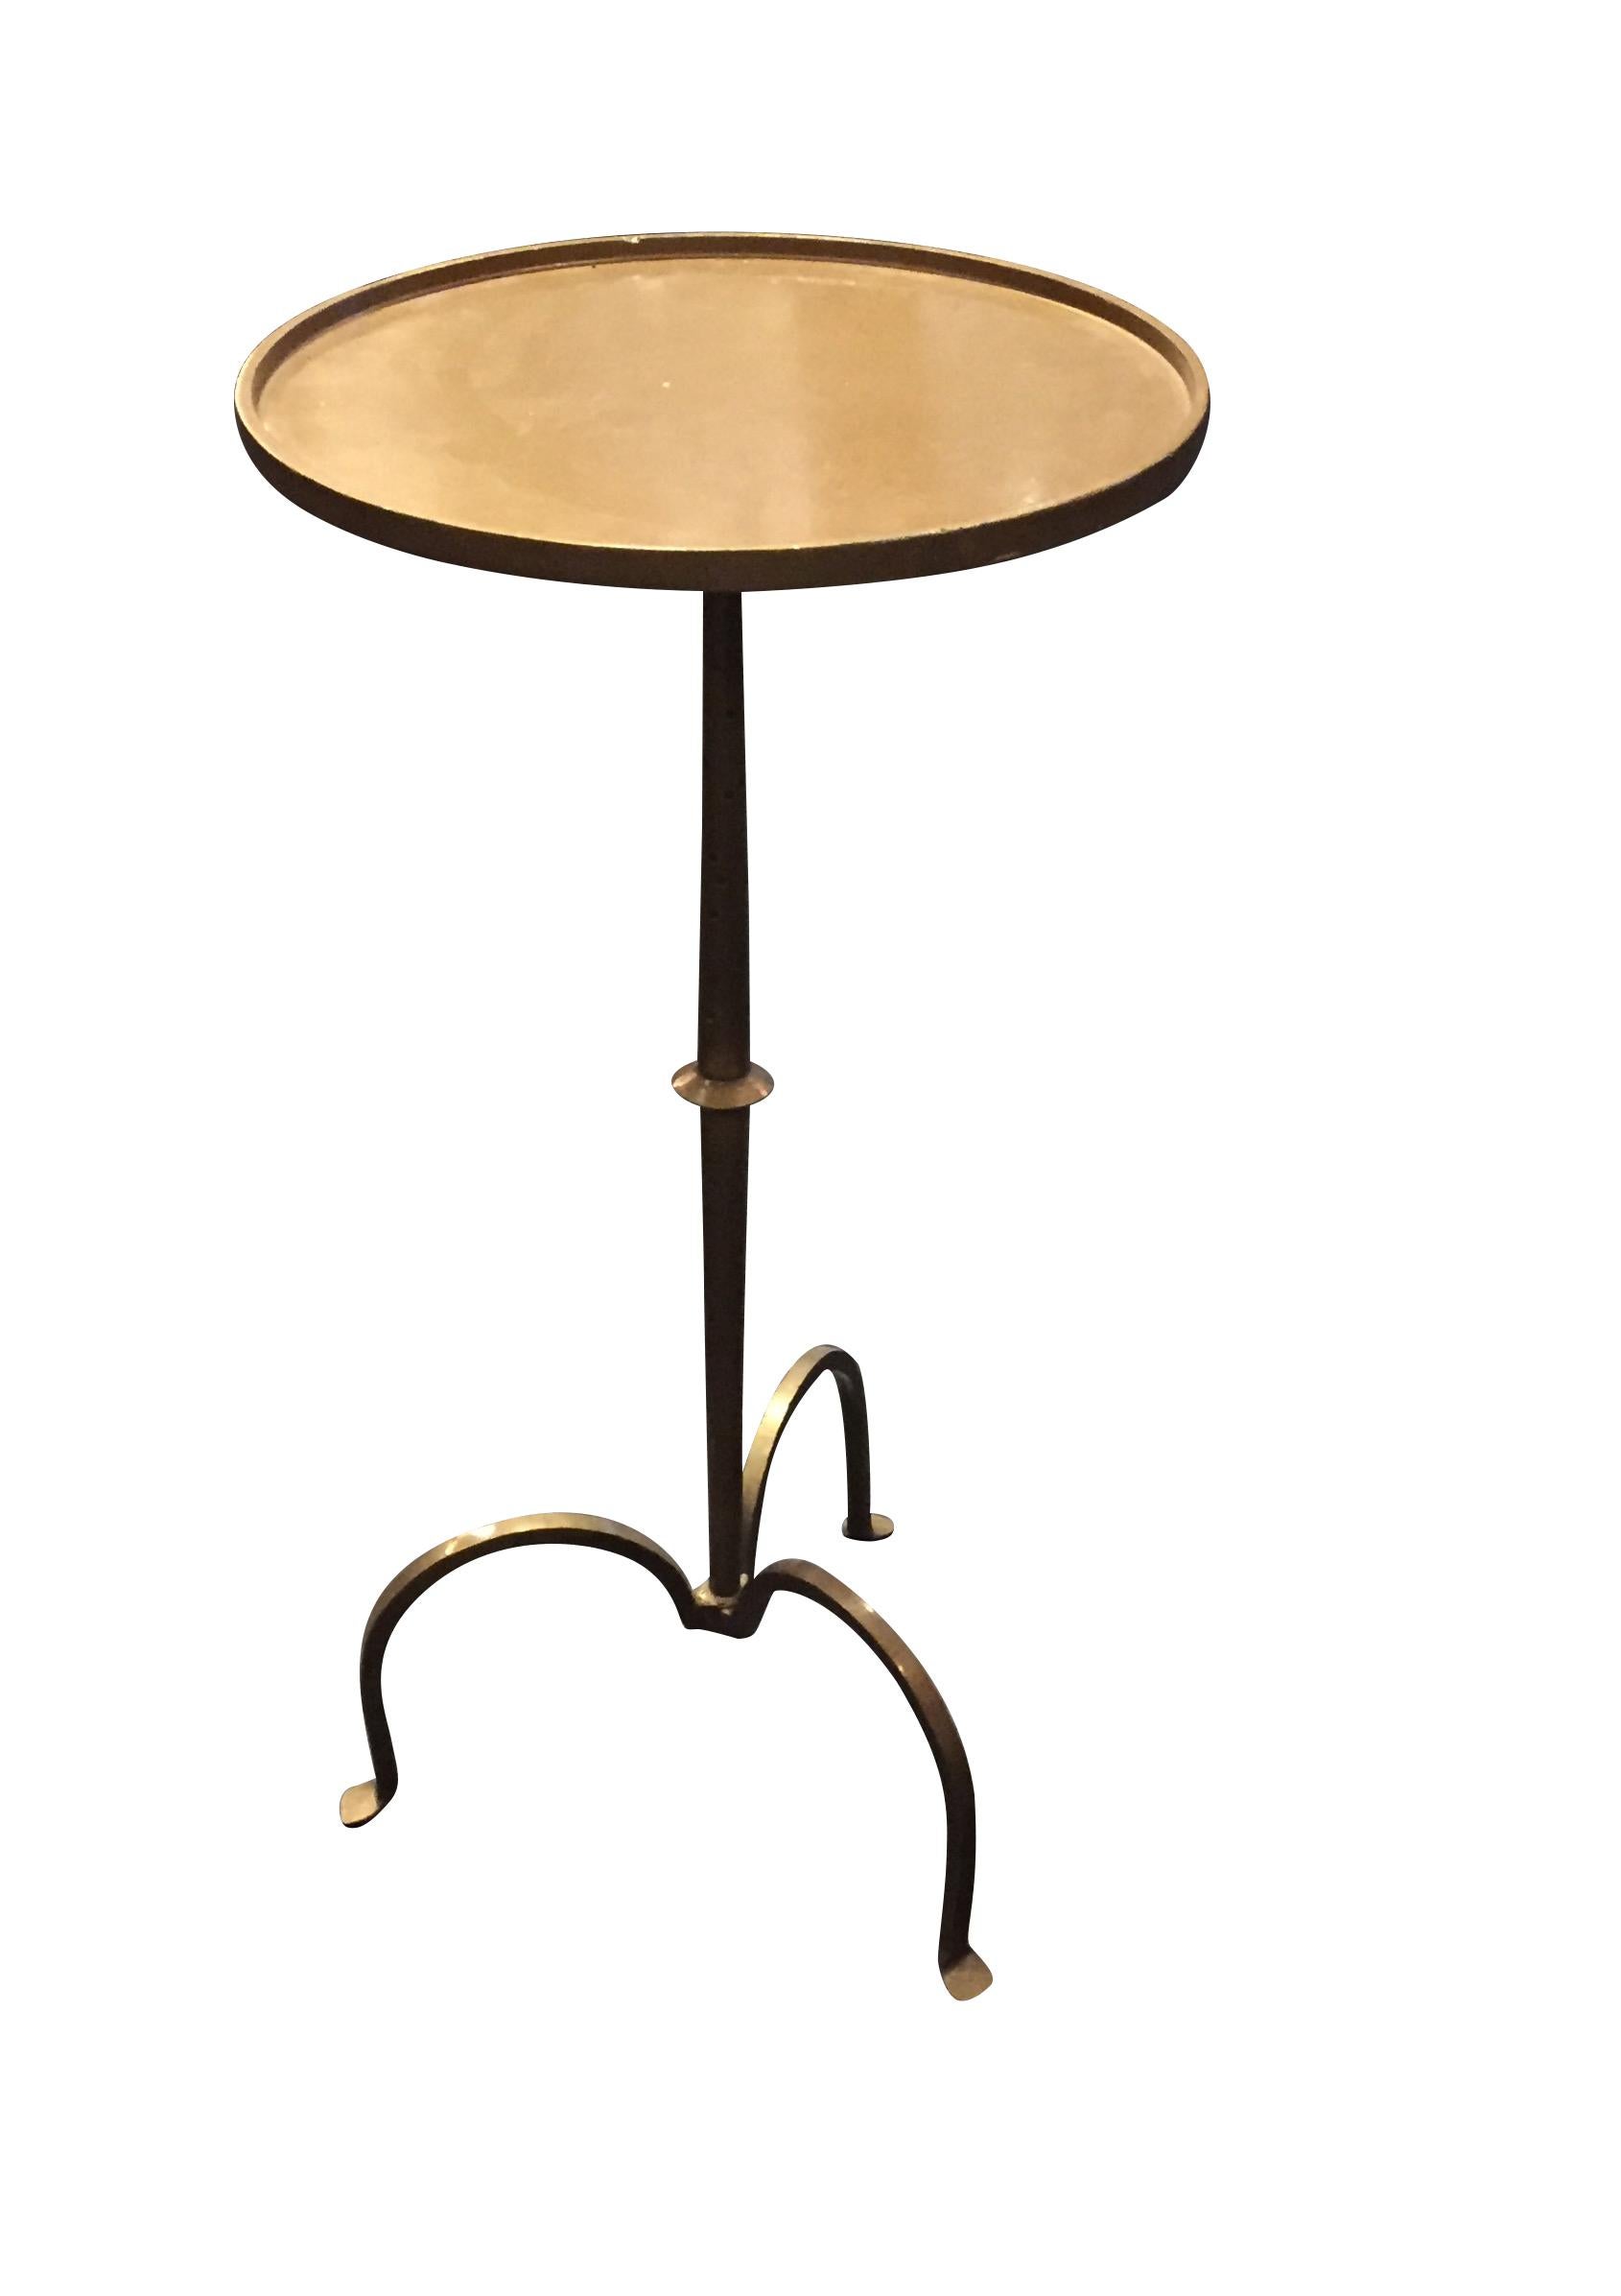 Modern Black Rubbed Steel Small Side or Cocktail Table, China, Contemporary For Sale